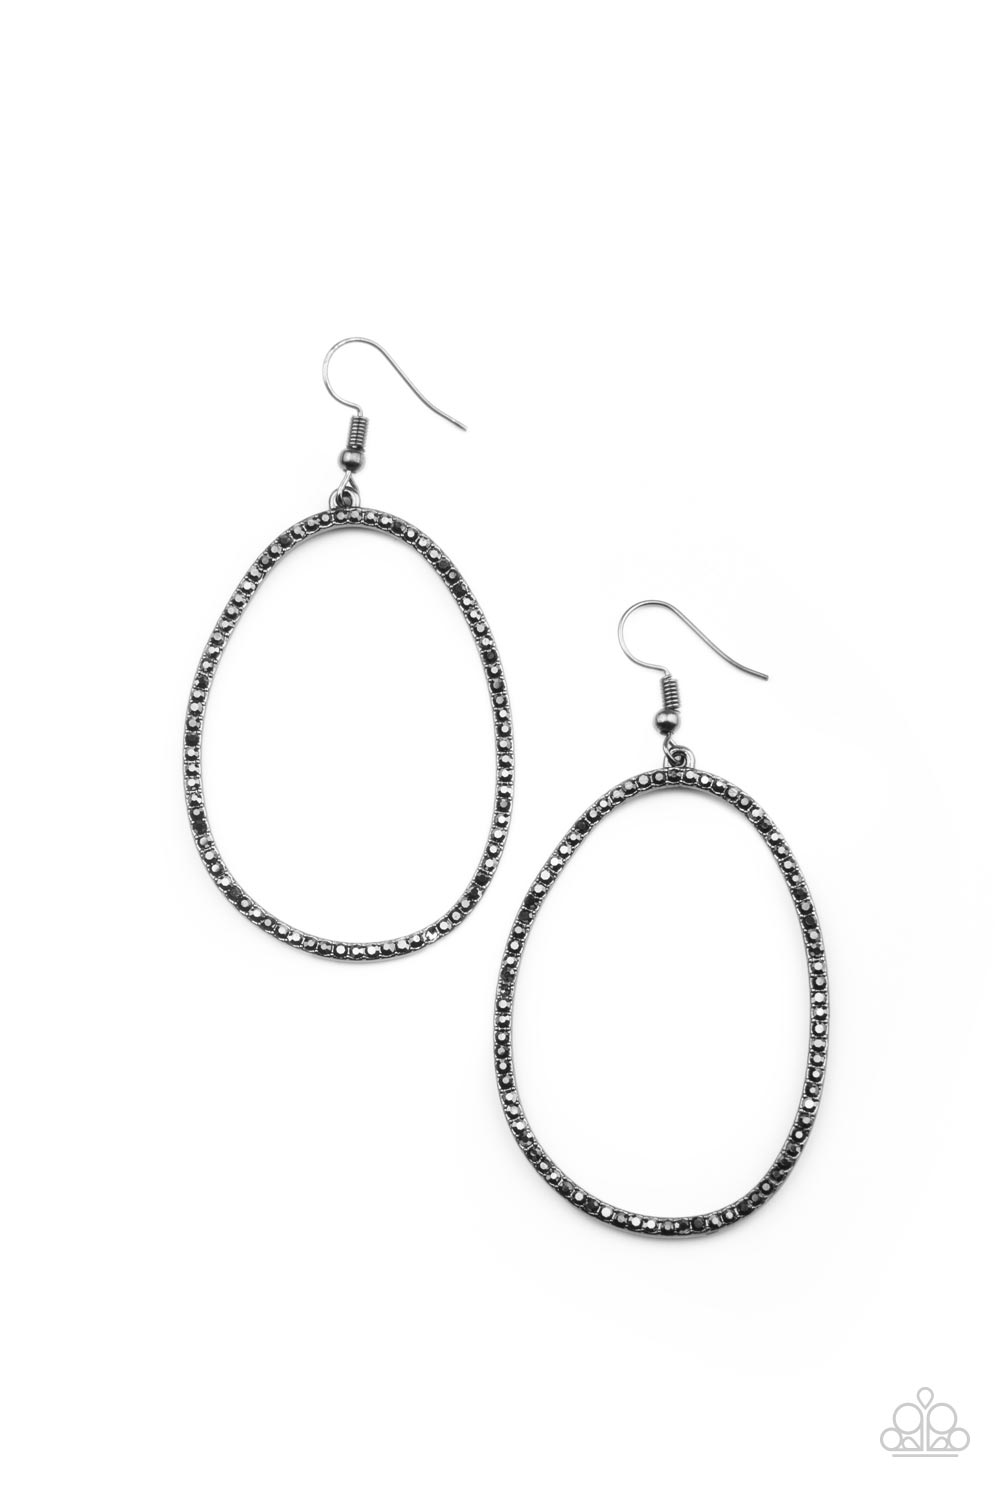 OVAL-ruled! - Black - Bling With Crystal